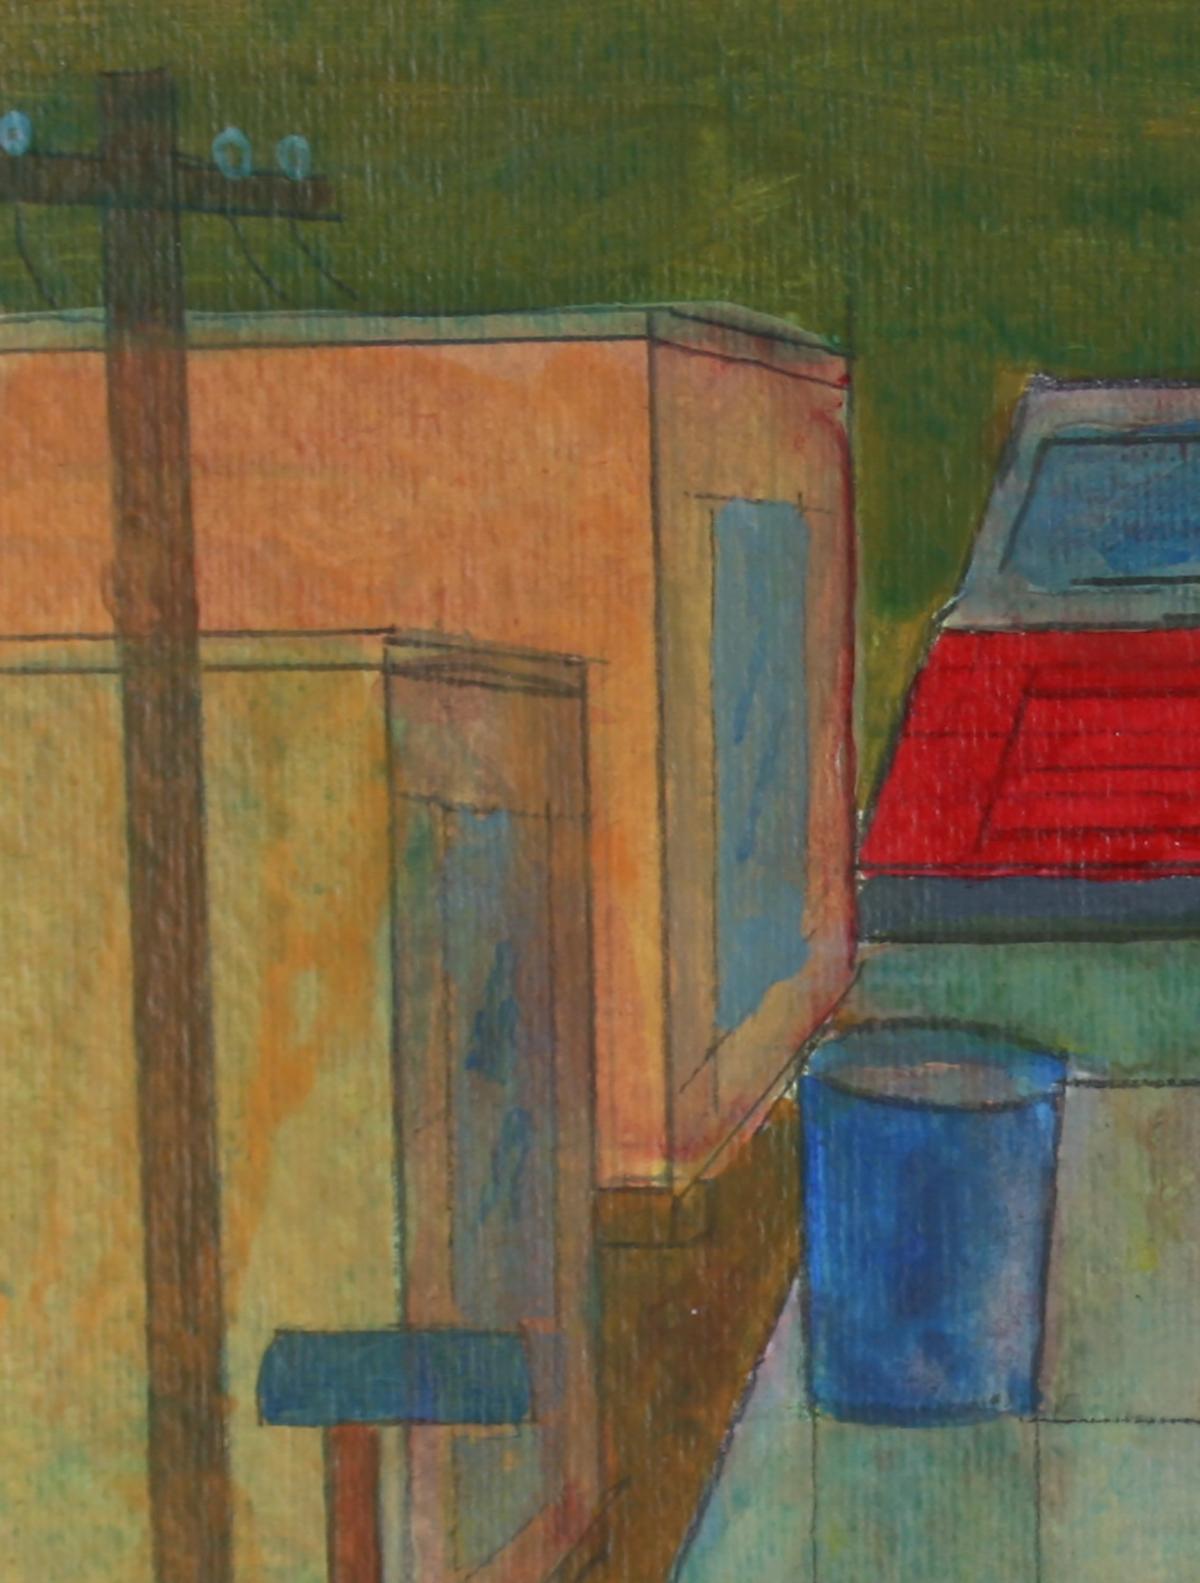 This 2008 acrylic and graphite on paper city scene of a Los Angeles neighborhood with a red car is by Viennese/ Southern California artist Dave Fox (1920-2011). Fox received his BFA, MA and MFA from California State University, Fullerton. He was